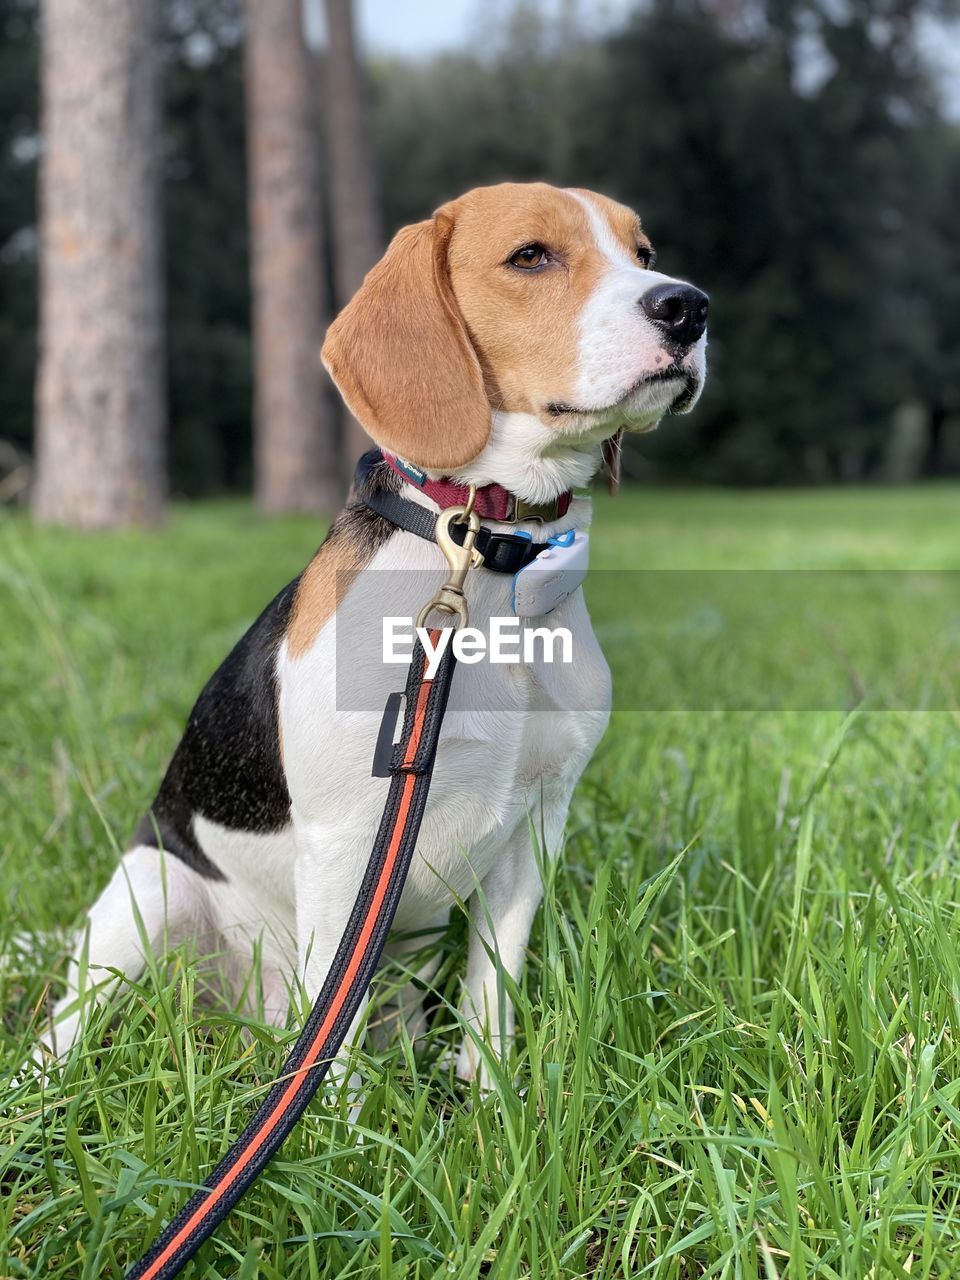 pet, one animal, dog, canine, animal themes, animal, domestic animals, mammal, grass, plant, beagle, treeing walker coonhound, collar, pet collar, english foxhound, puppy, american foxhound, nature, looking, leash, no people, hound, looking away, pet leash, day, outdoors, focus on foreground, pet clothing, cute, purebred dog